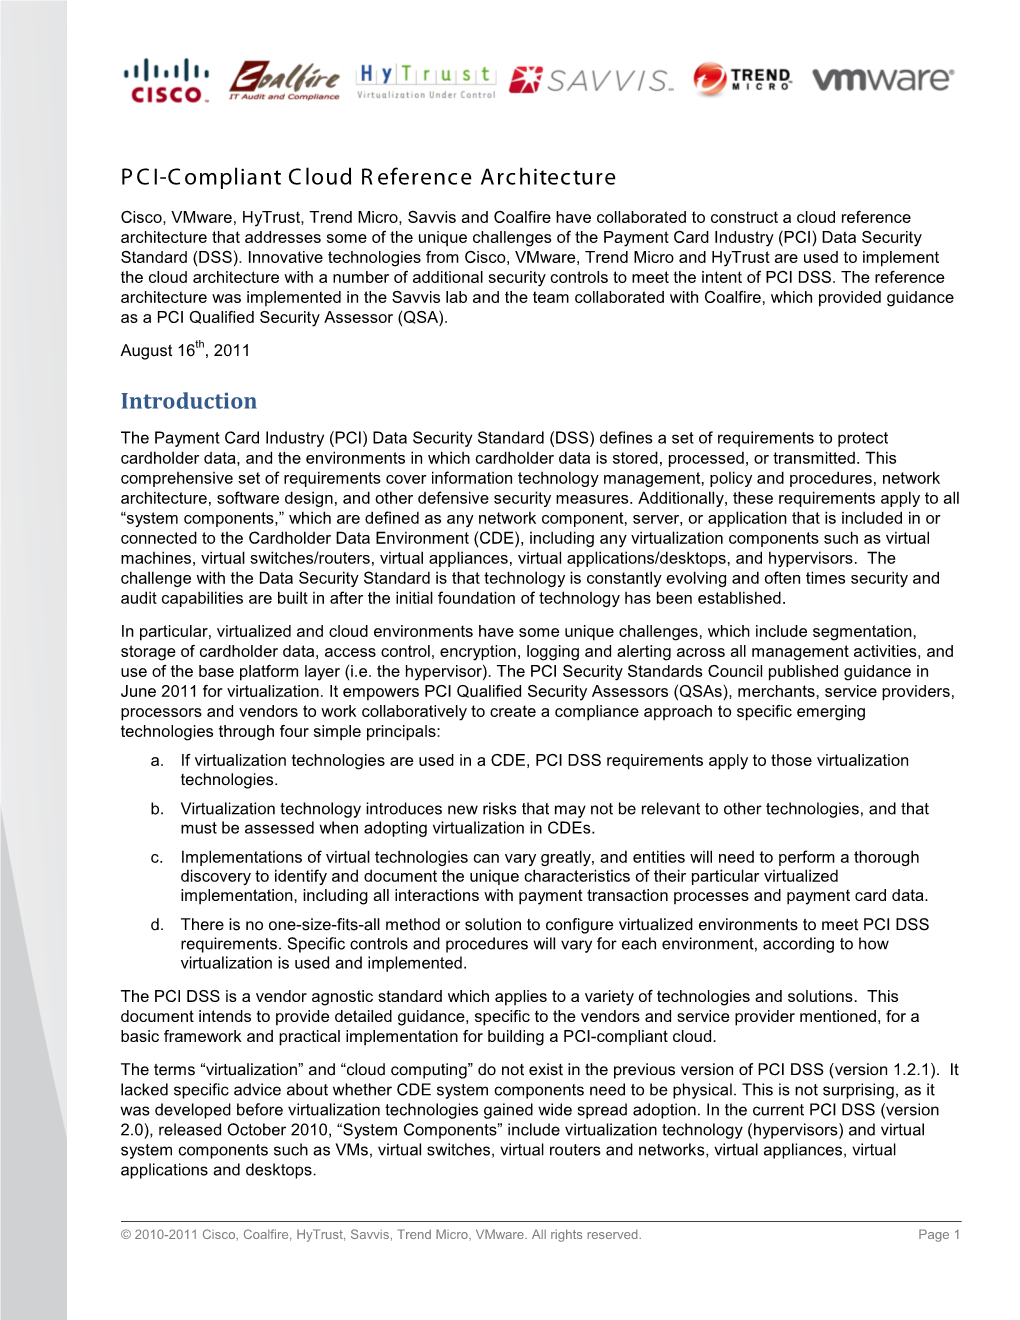 PCI-Compliant Cloud Reference Architecture Introduction